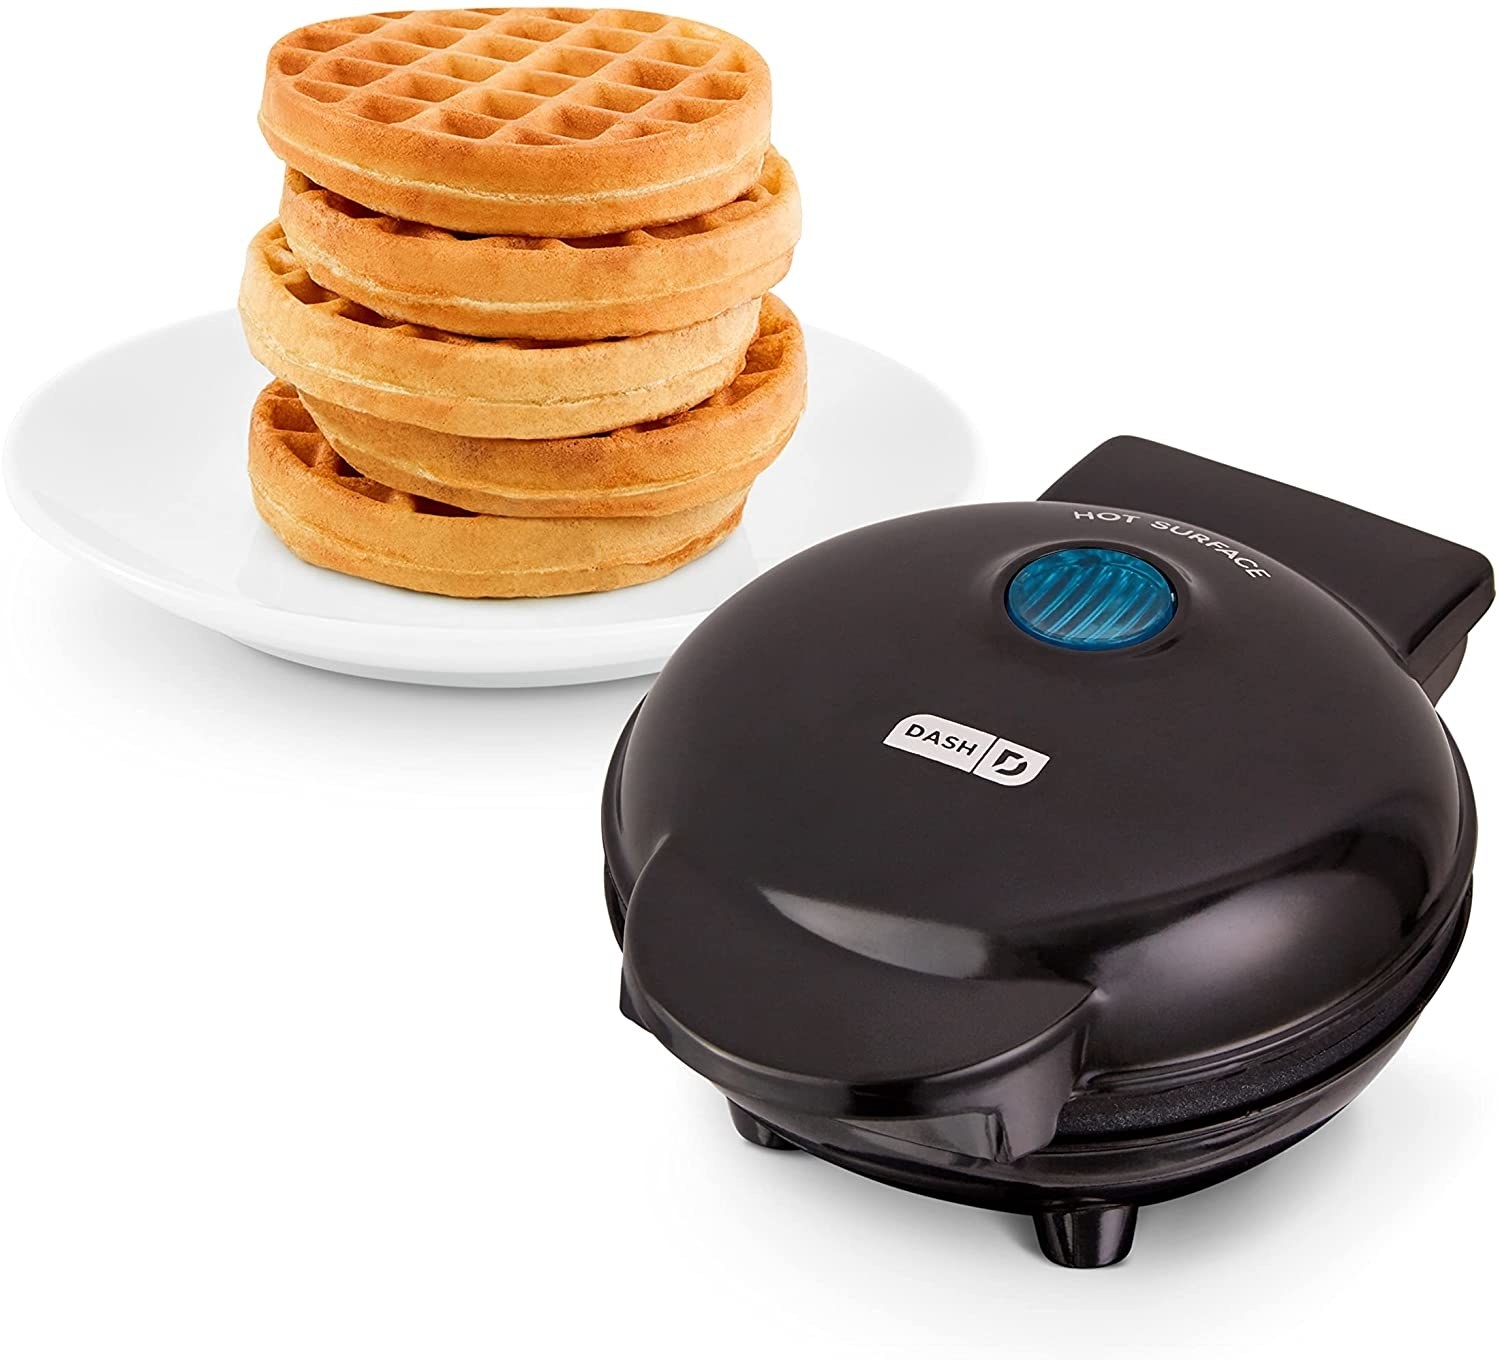 The waffle maker sitting next to a stack of waffles on a plate